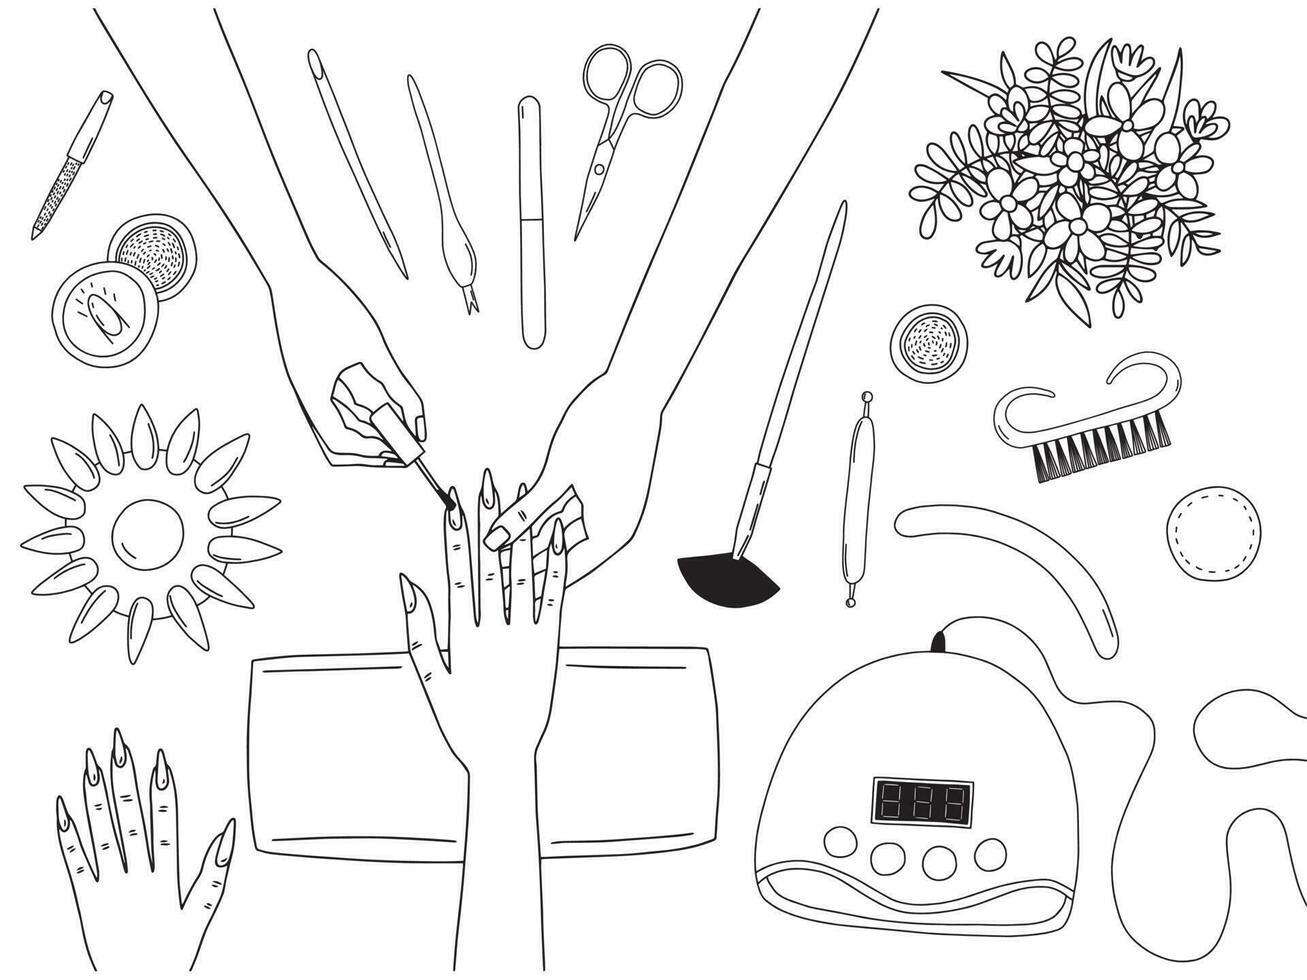 Vector manicure session coloring page illustration. Hand drawn manicure salon process top view vector illustration.